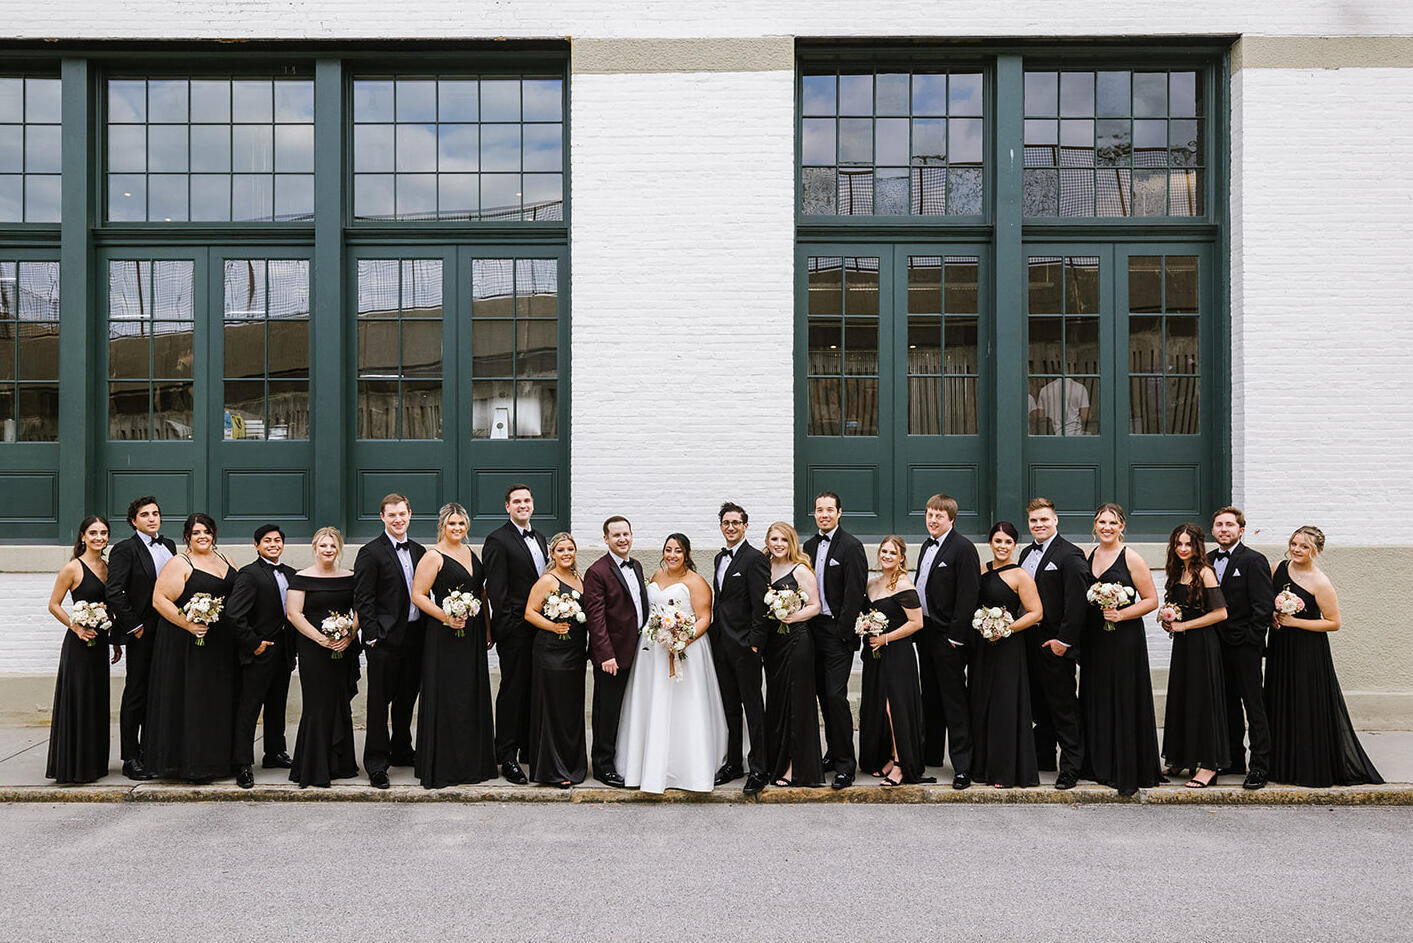 A wedding party poses for a group portrait during an industrial wedding in Baltimore. Bridemaids wore black gowns, groomsmen wore black tuxedos, and the groom wore a burgundy dinner jacket. 